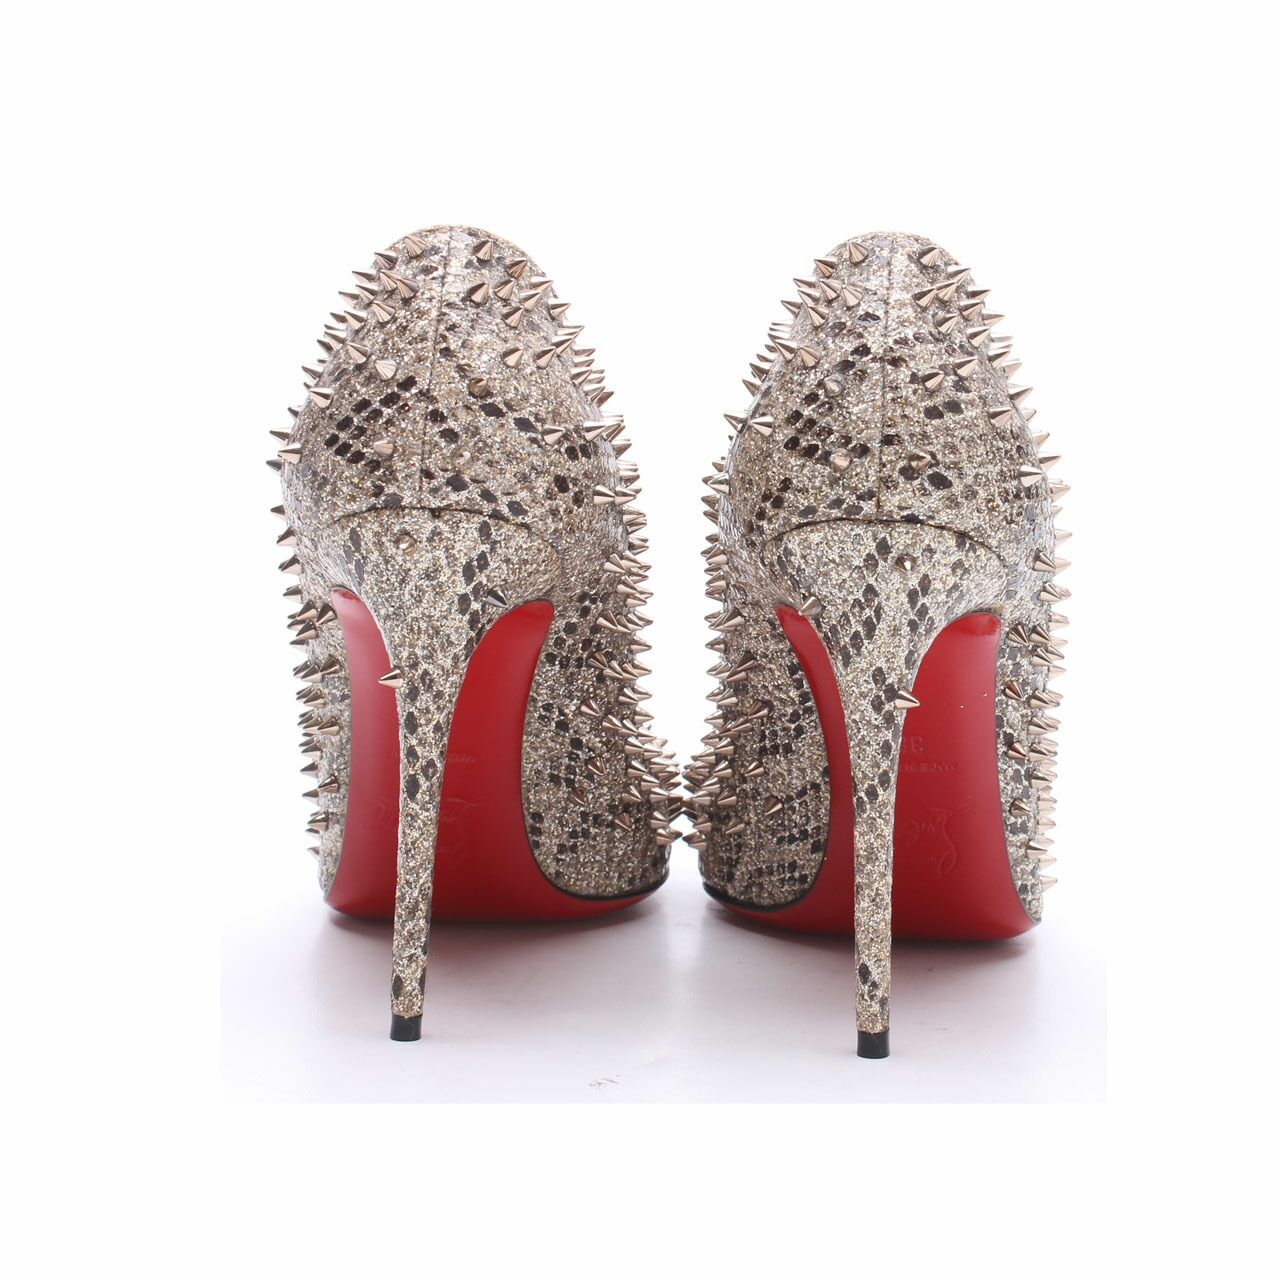 Christian Louboutin Pigalle Silver Spikes Pump Heels